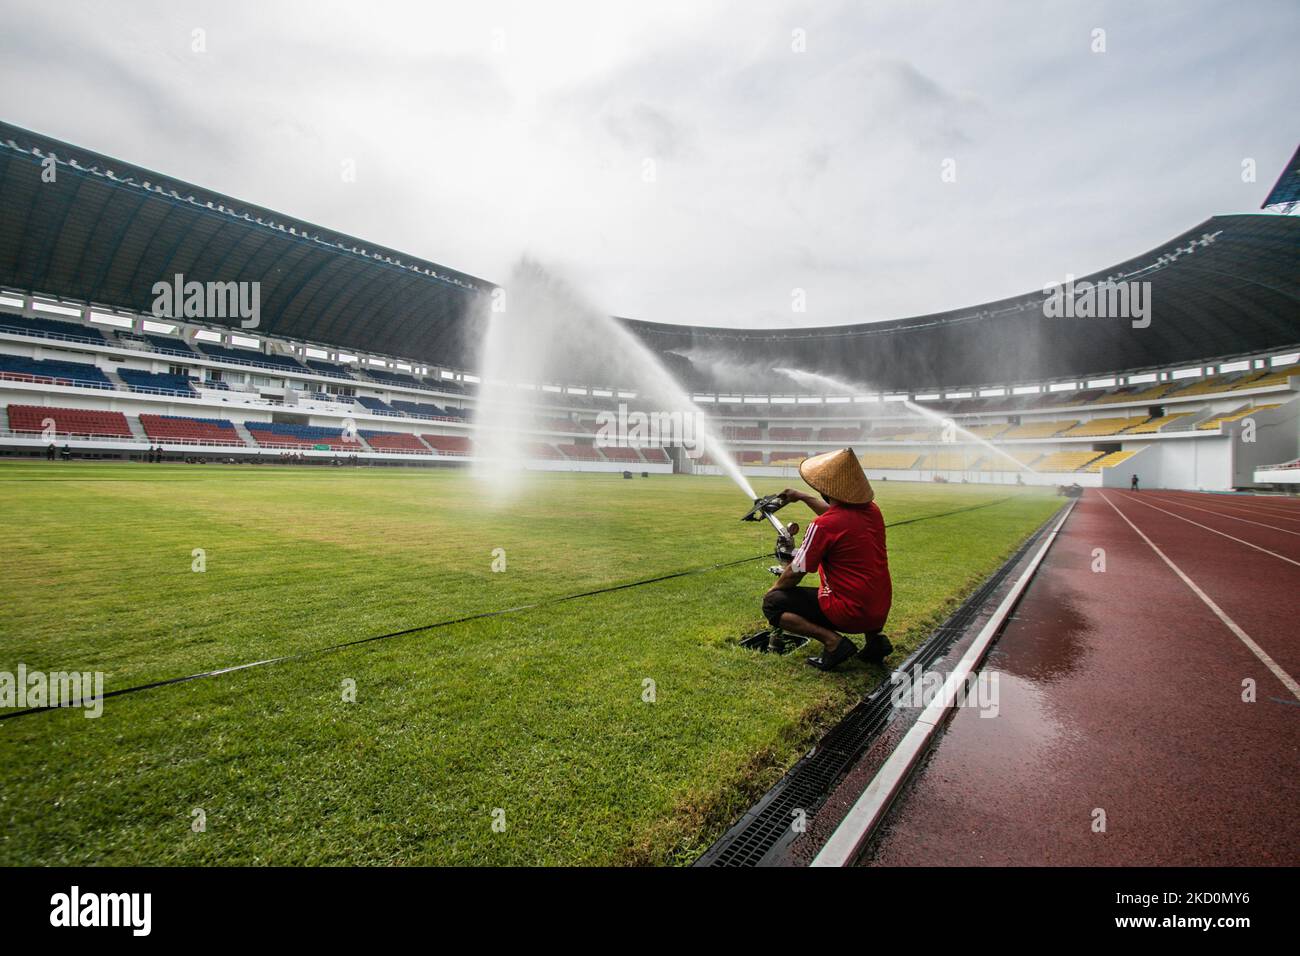 Workers take care of the grass species Zoysia japonica from Italy at the Jatidiri Stadium in Semarang, Central Java Province, Indonesia on January 18, 2022. According to the Central Java Provincial Government, the renovation of the stadium which has been carried out since 2016 with a capacity of 20,000 seats without a single seat to around 25,000 seats using one seat. The use of the stadium is targeted for 2023 which is currently in the stage of fulfillment and application for certification and leveraging of AFC and FIFA standards. (Photo by WF Sihardian/NurPhoto) Stock Photo